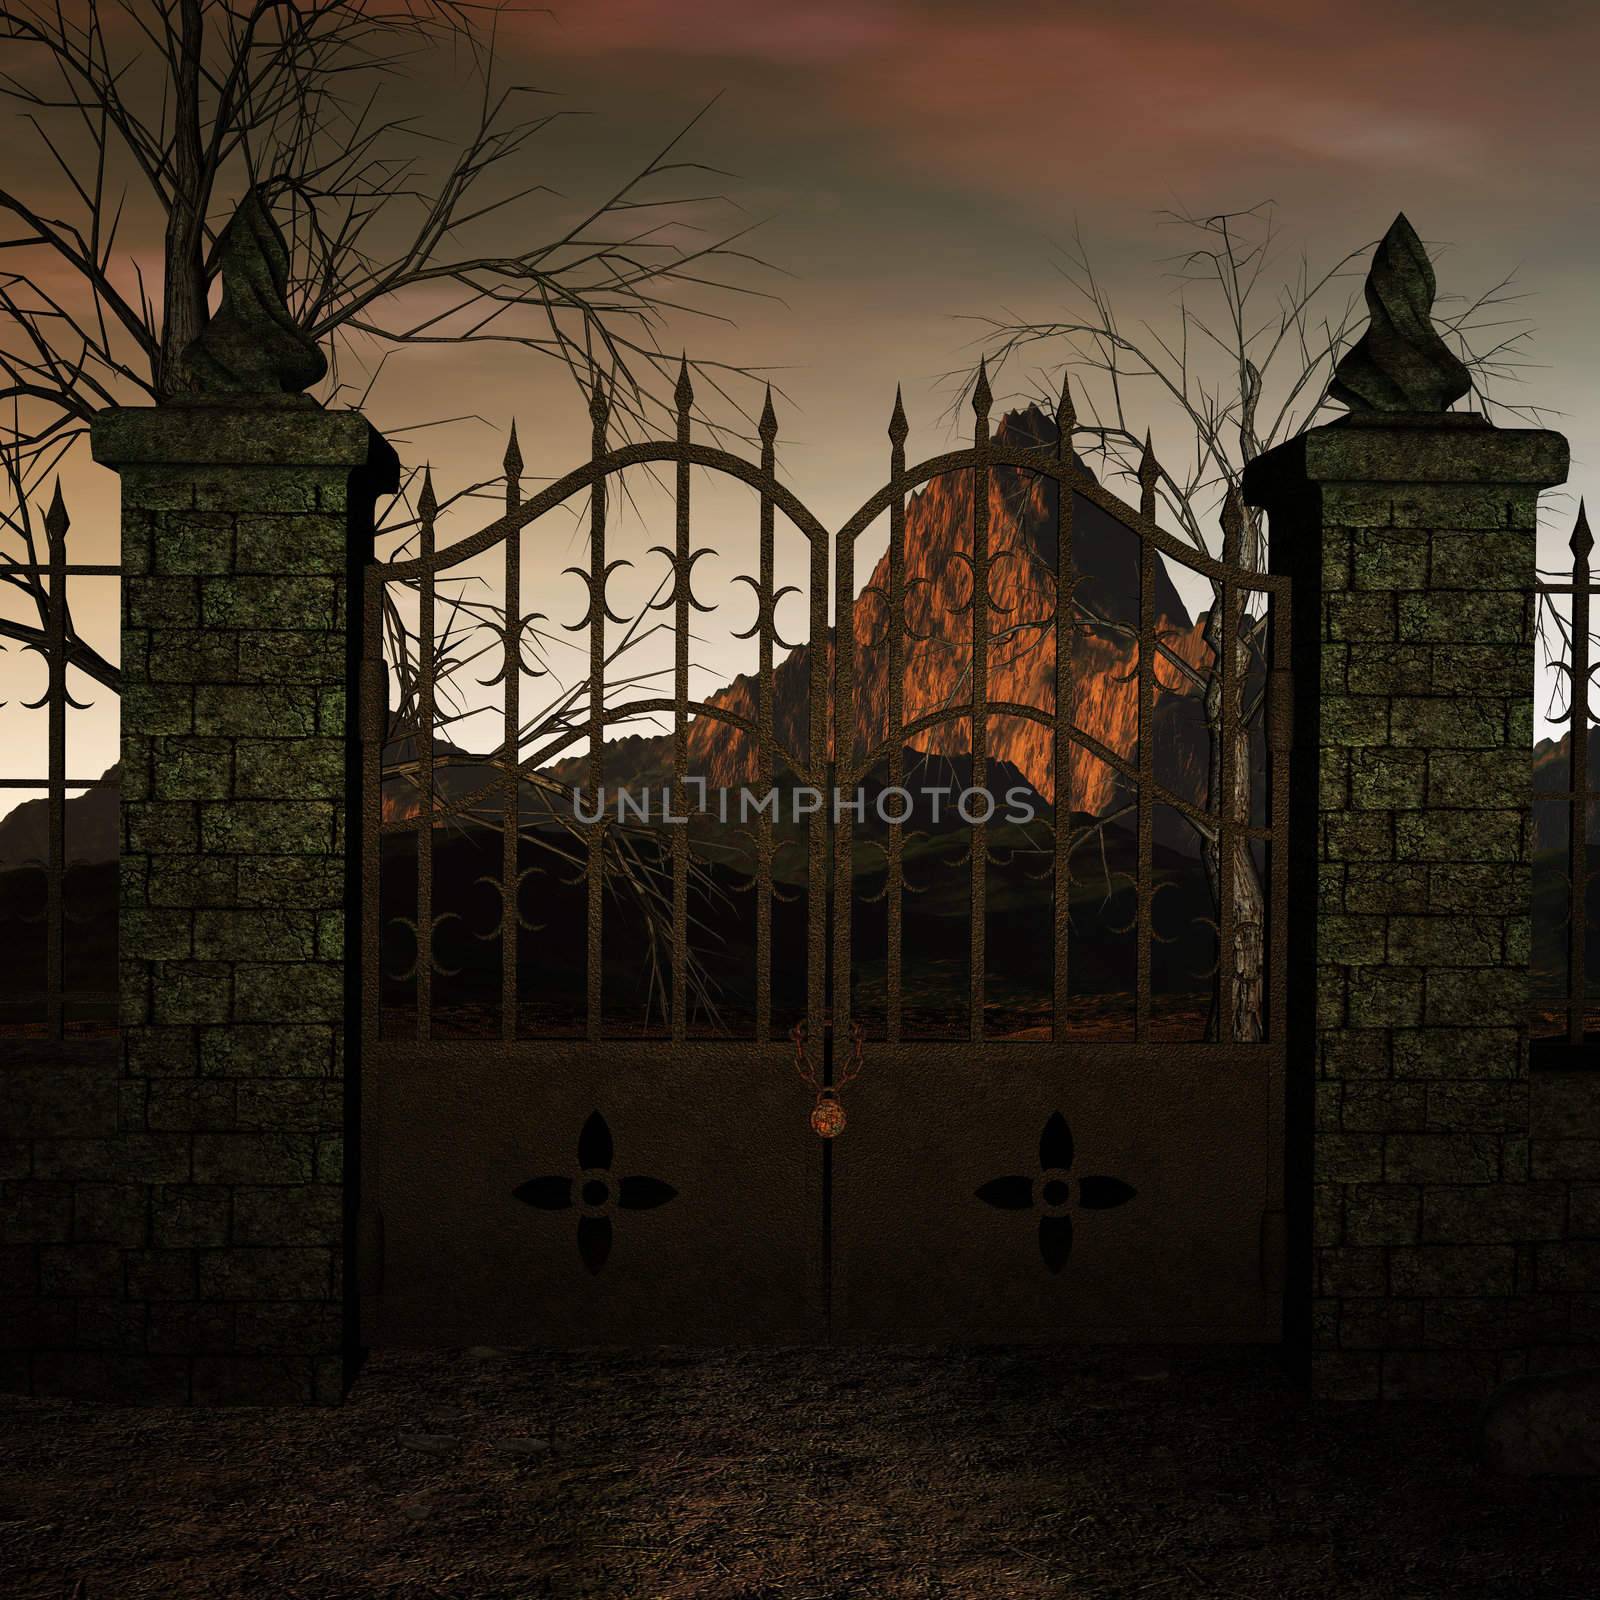 The Gate by kathygold